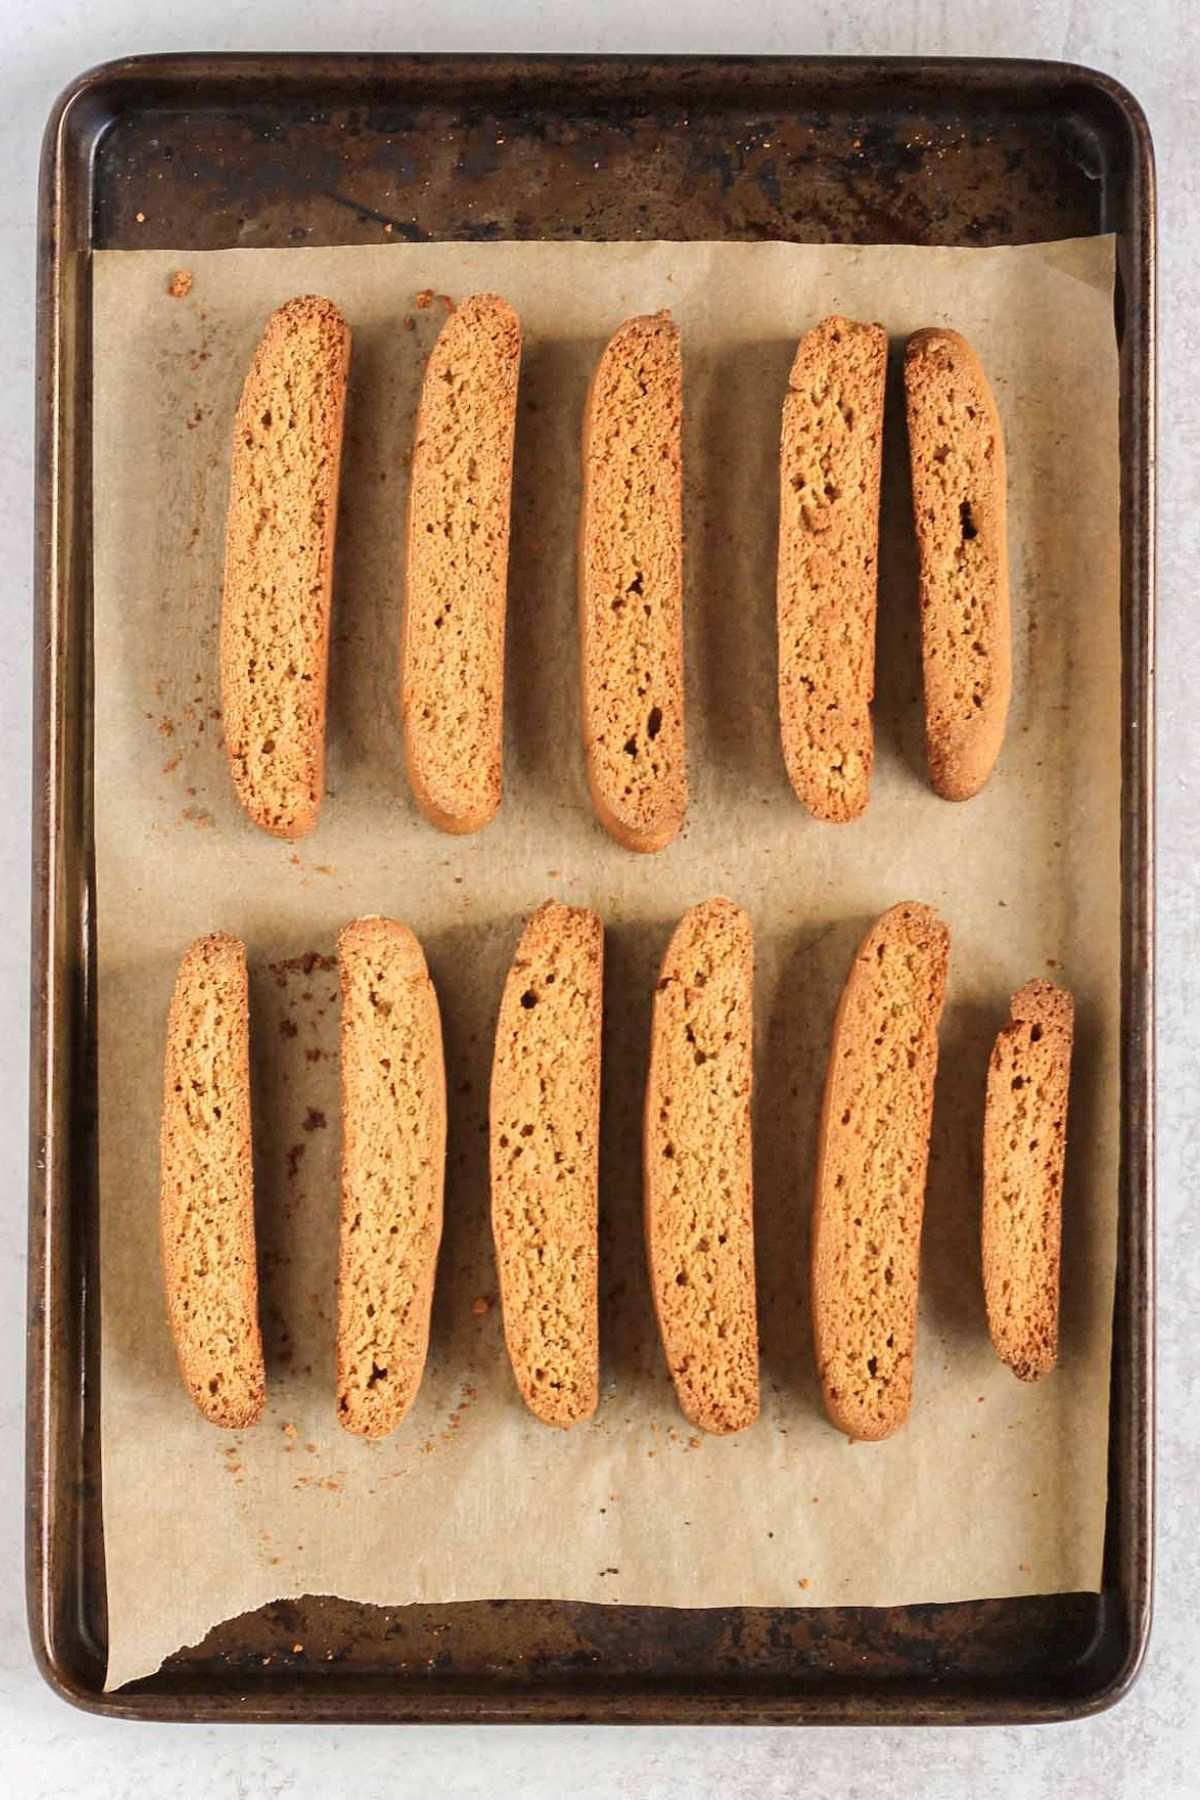 Sliced biscotti on a parchment paper lined baking sheet after baking the second time.